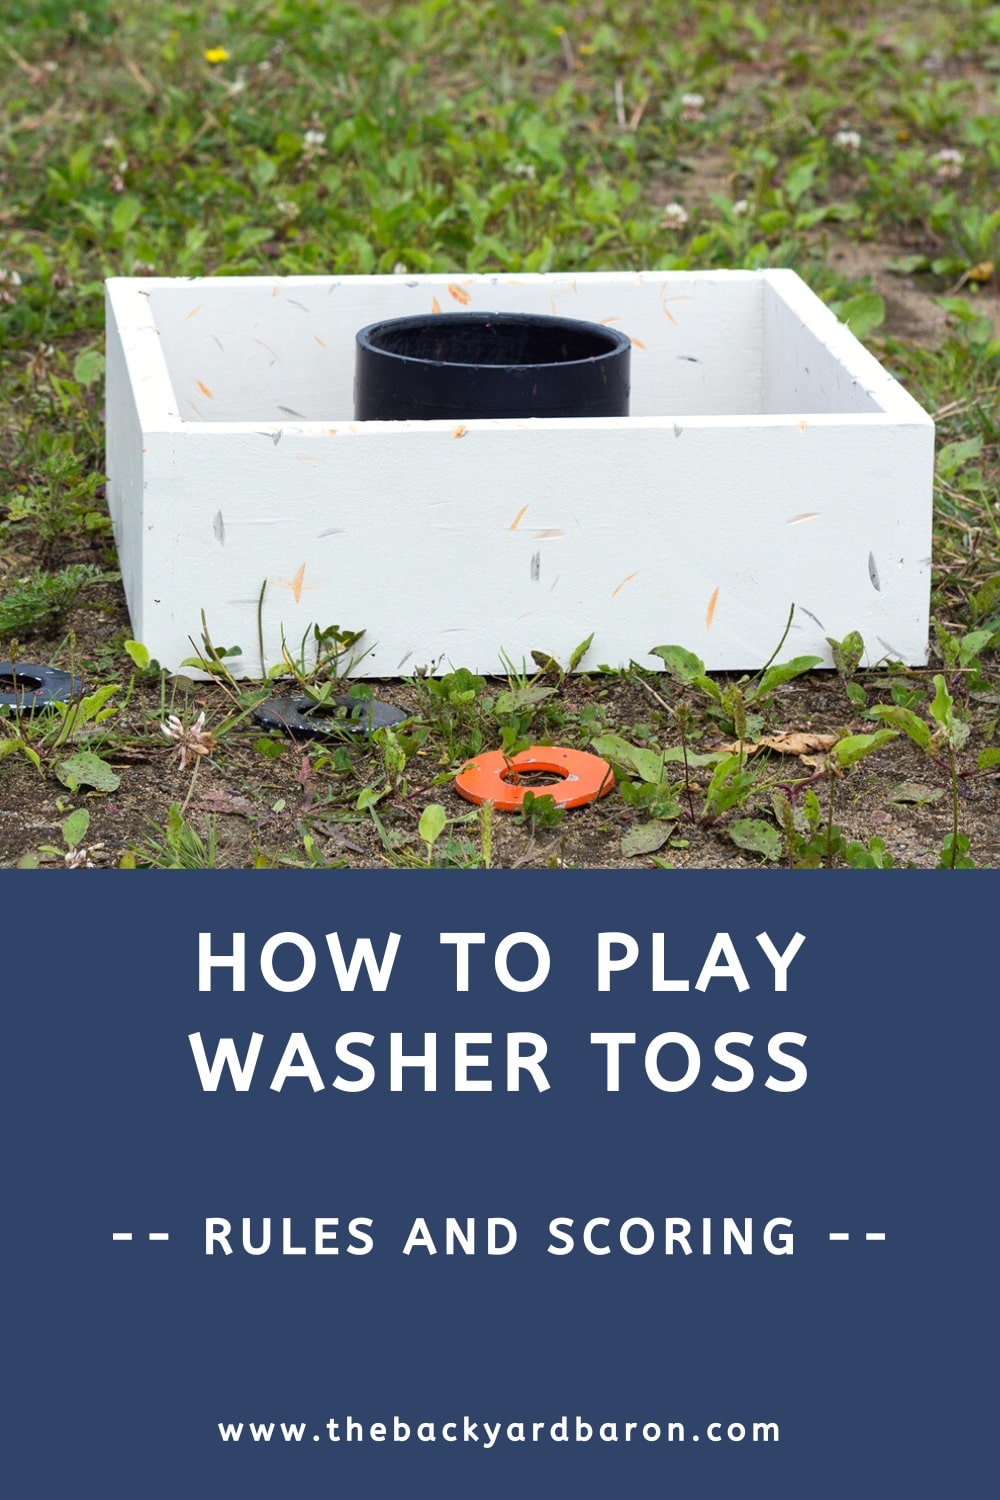 How to play washer toss (rules and scoring)